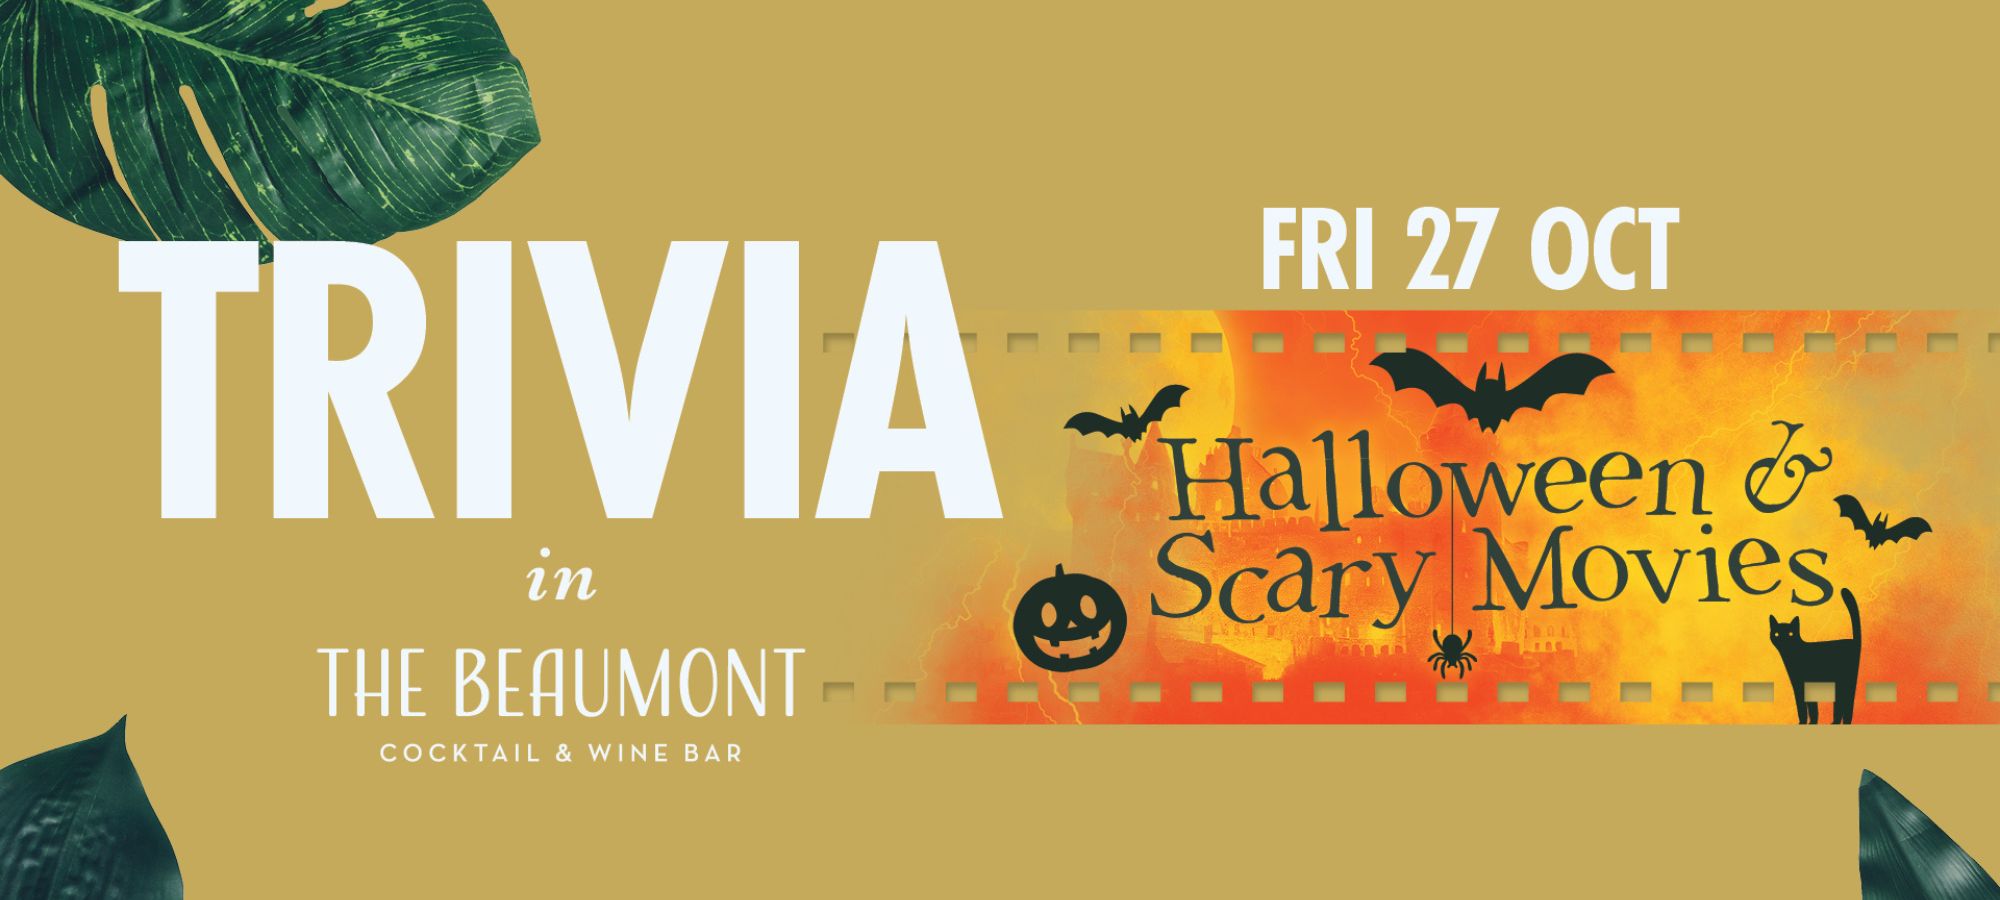 Trivia in The Beaumont – Halloween & Scary Movies